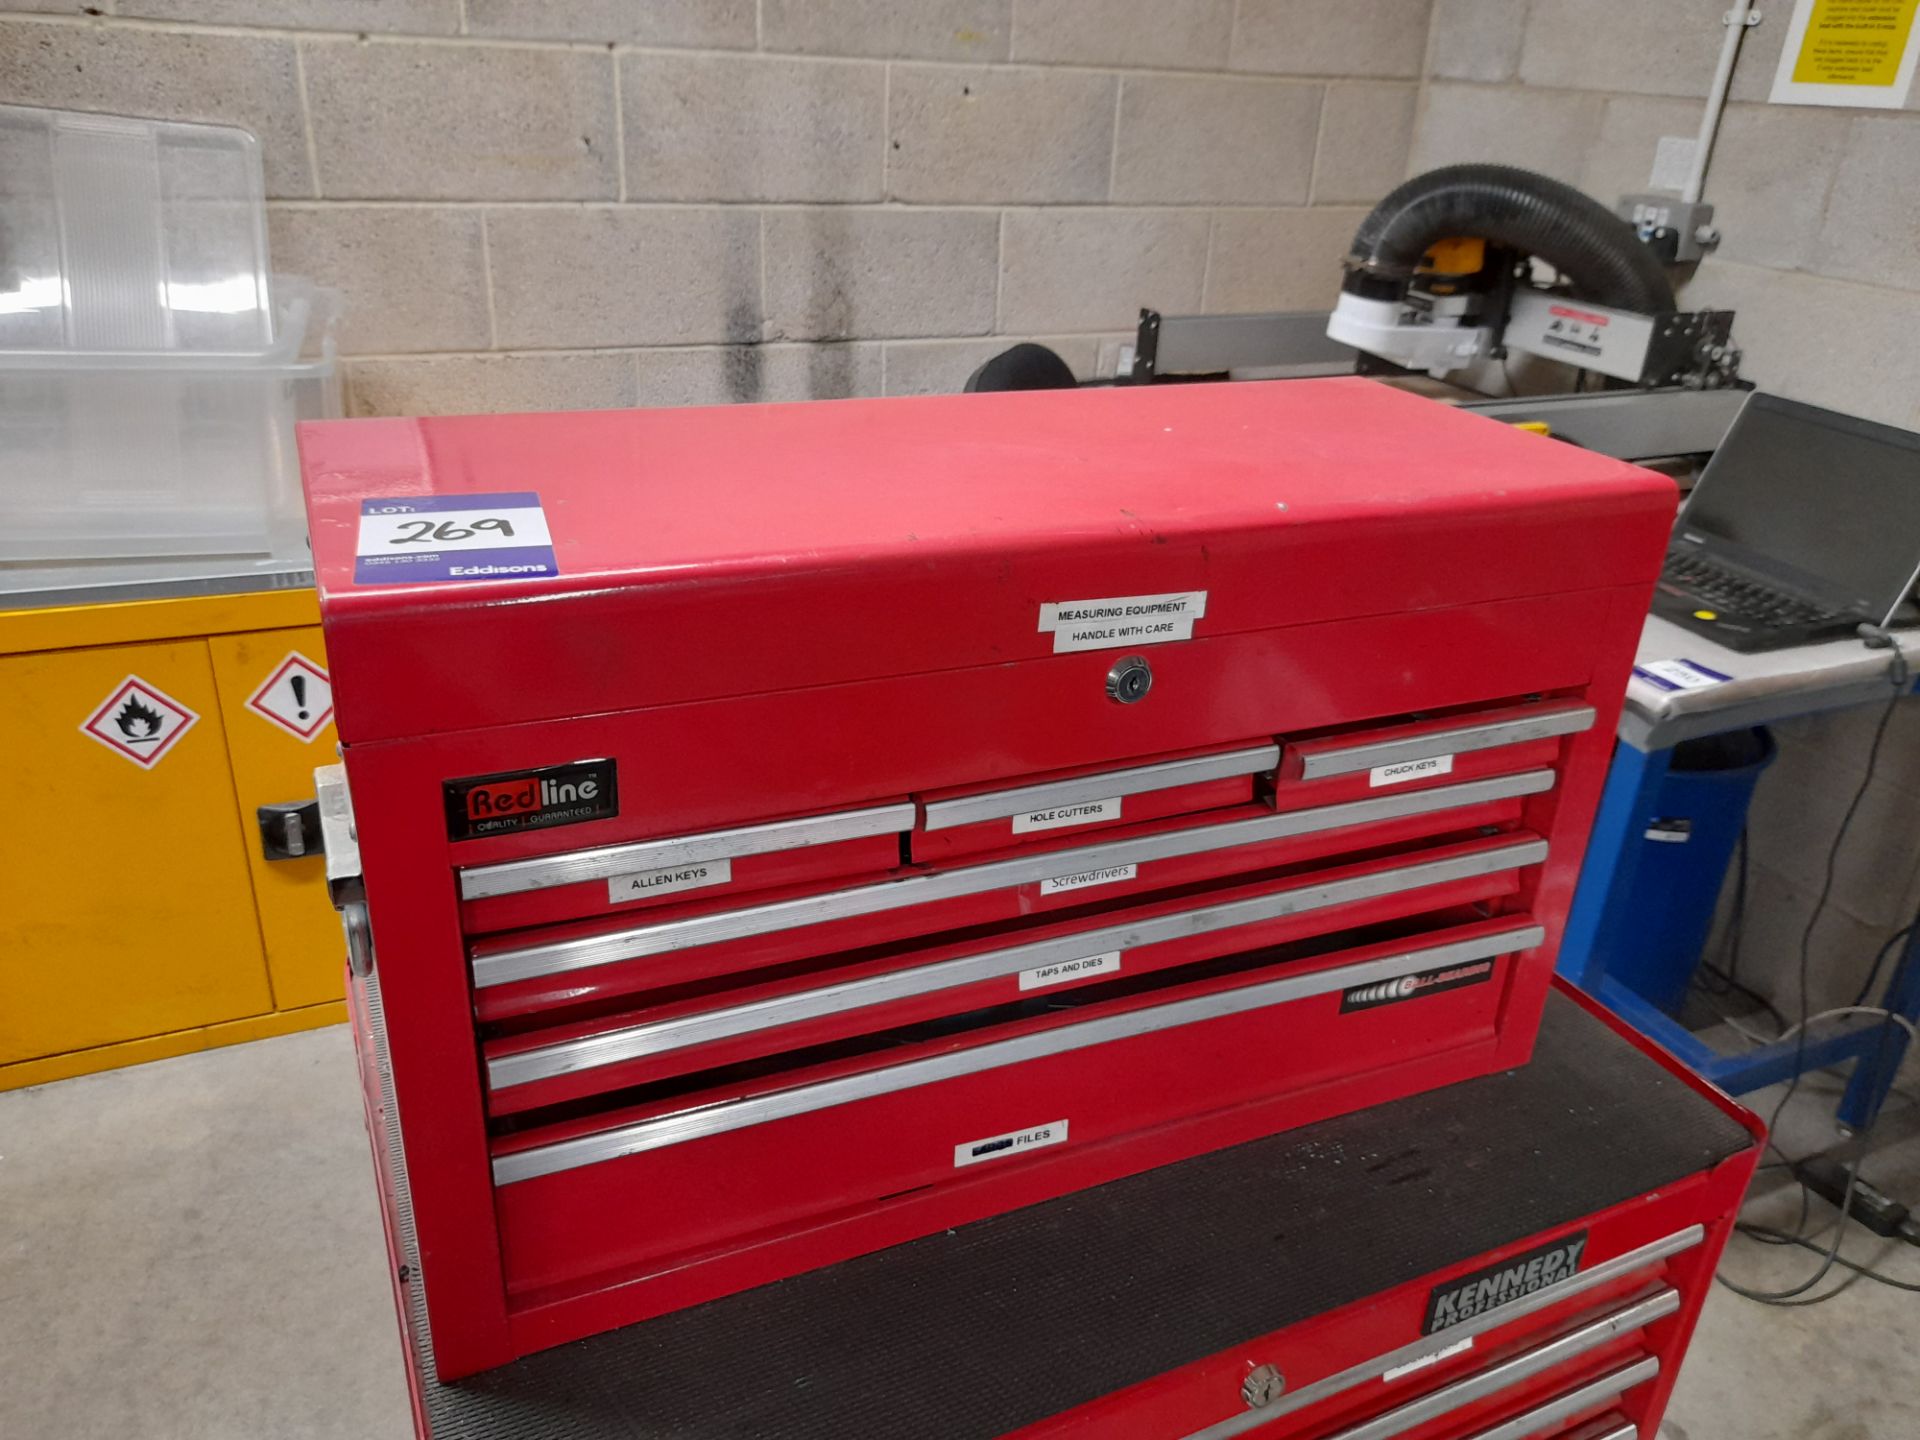 Redline mobile 6 drawer tool chest with contents